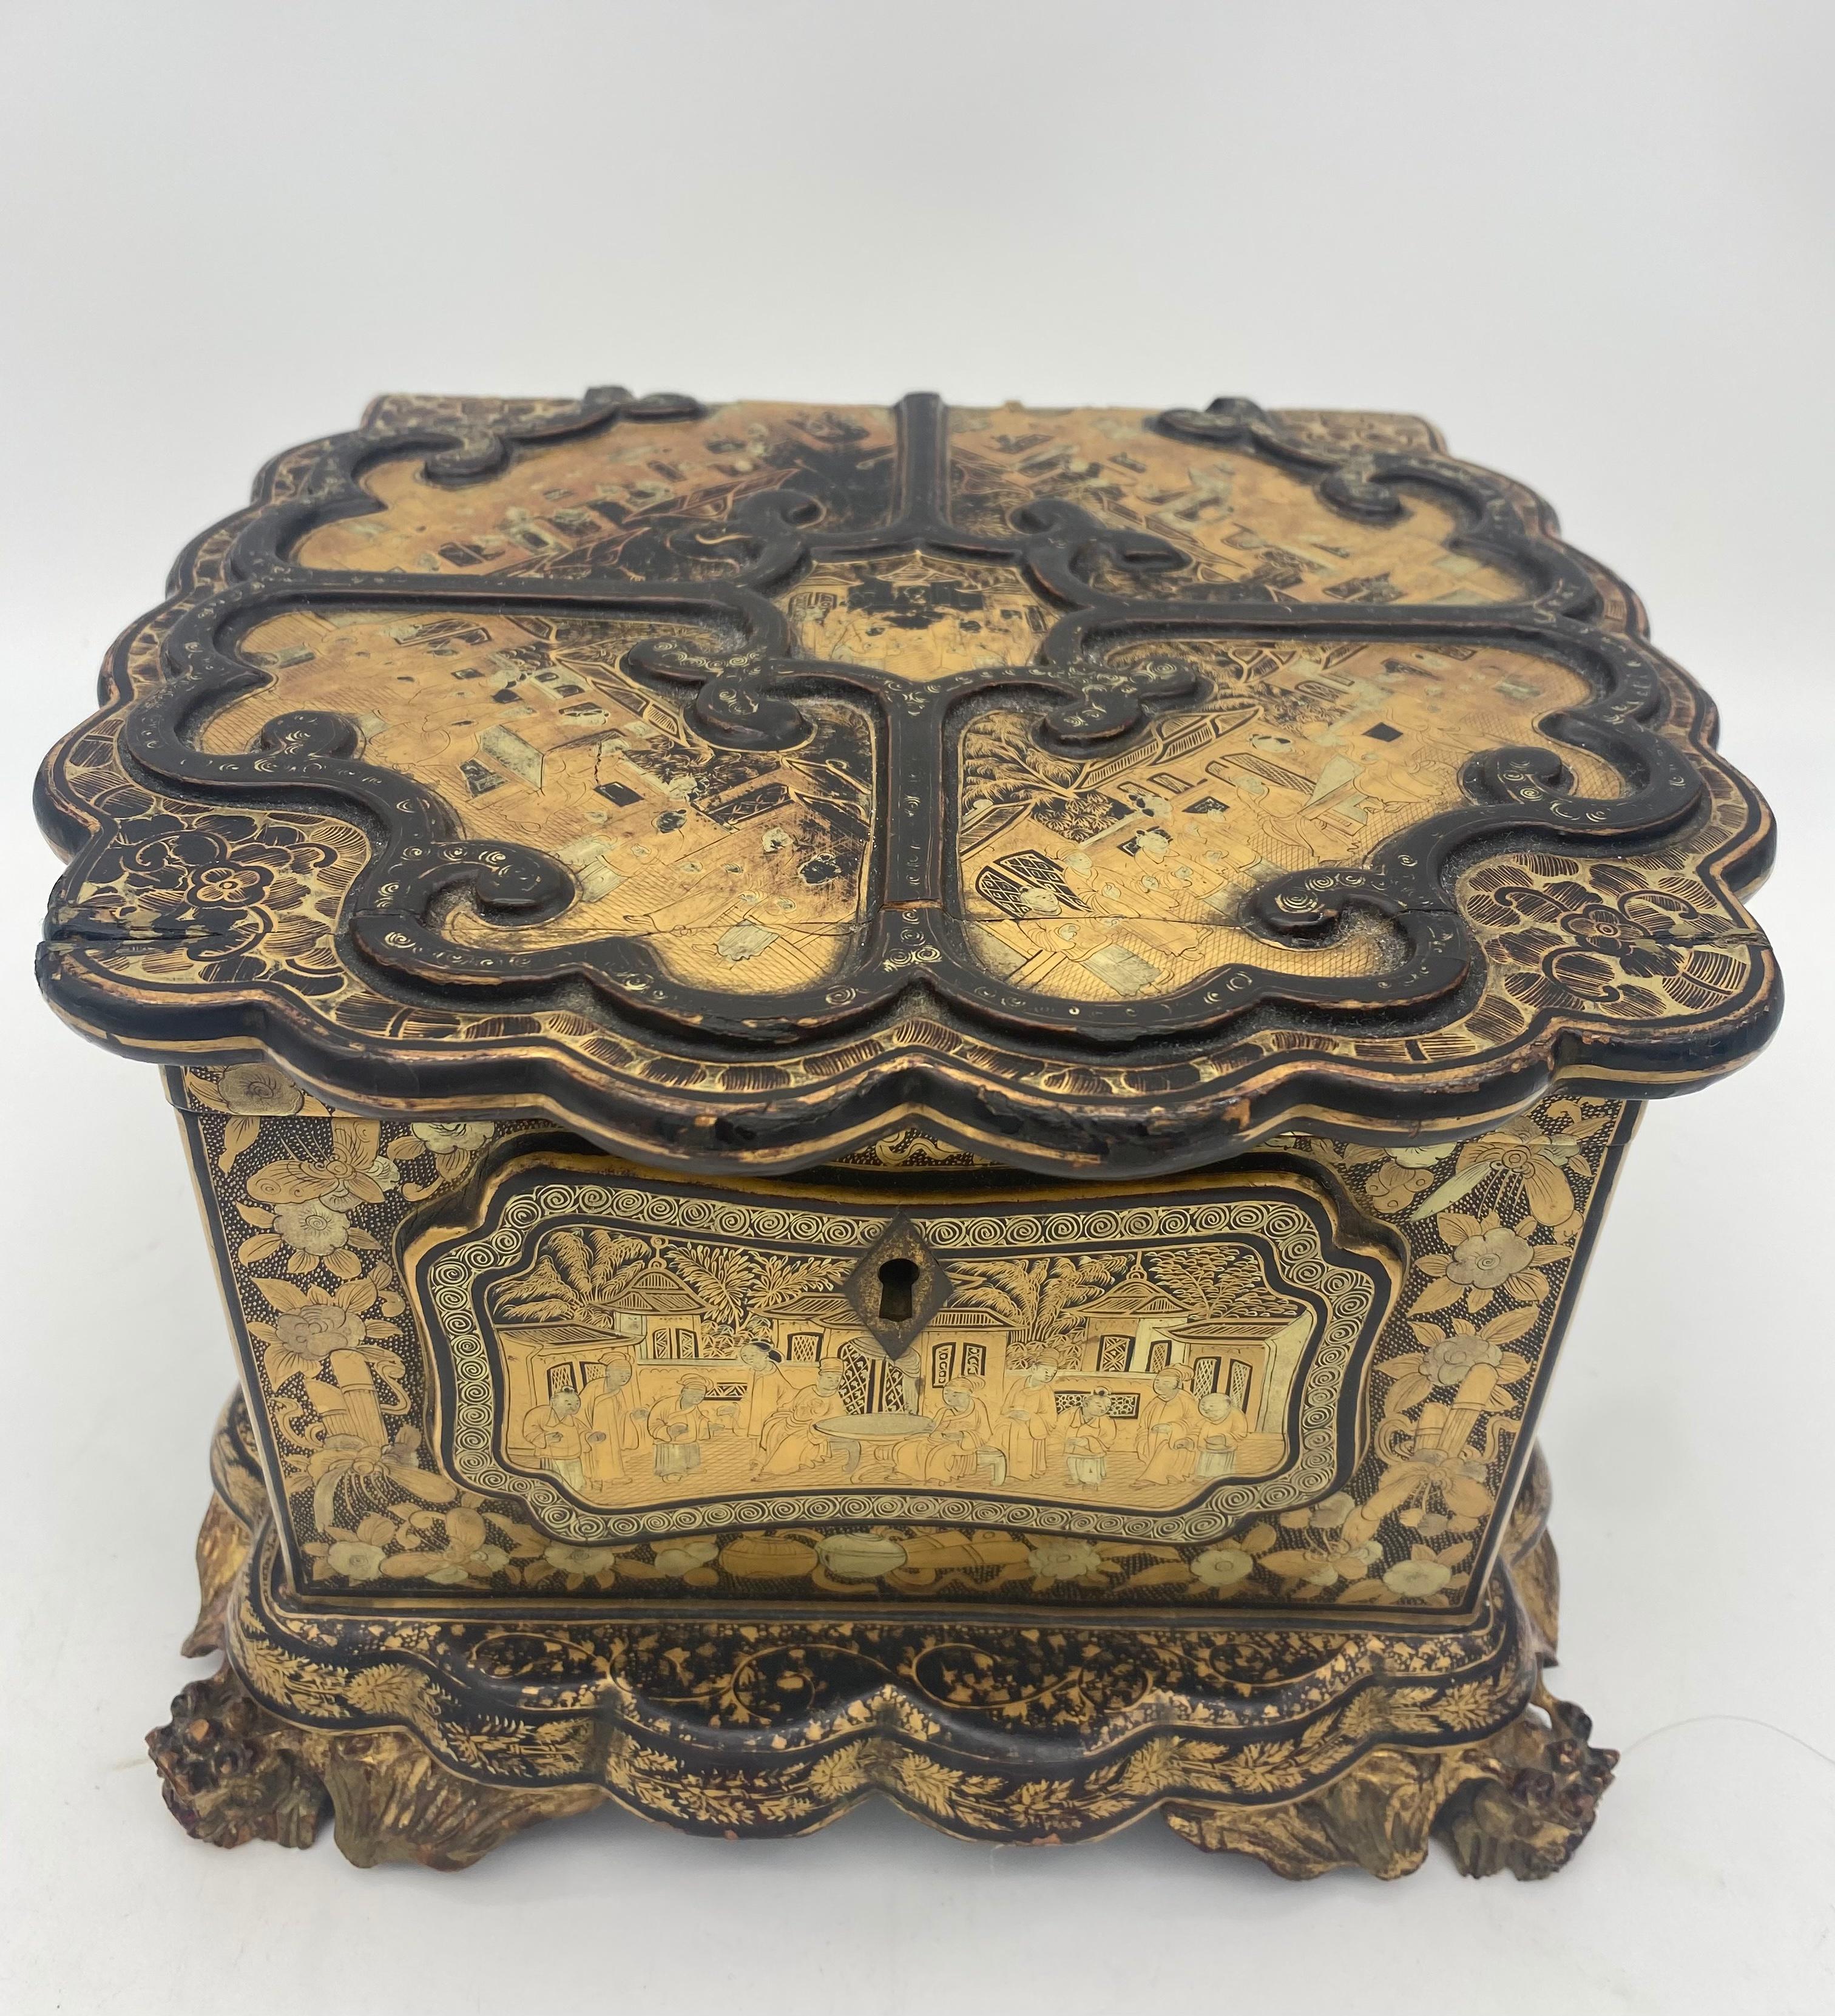 Unique 19th Century  Export Chinese Gilt Chinoiserie Lacquer Box In Good Condition For Sale In Brea, CA